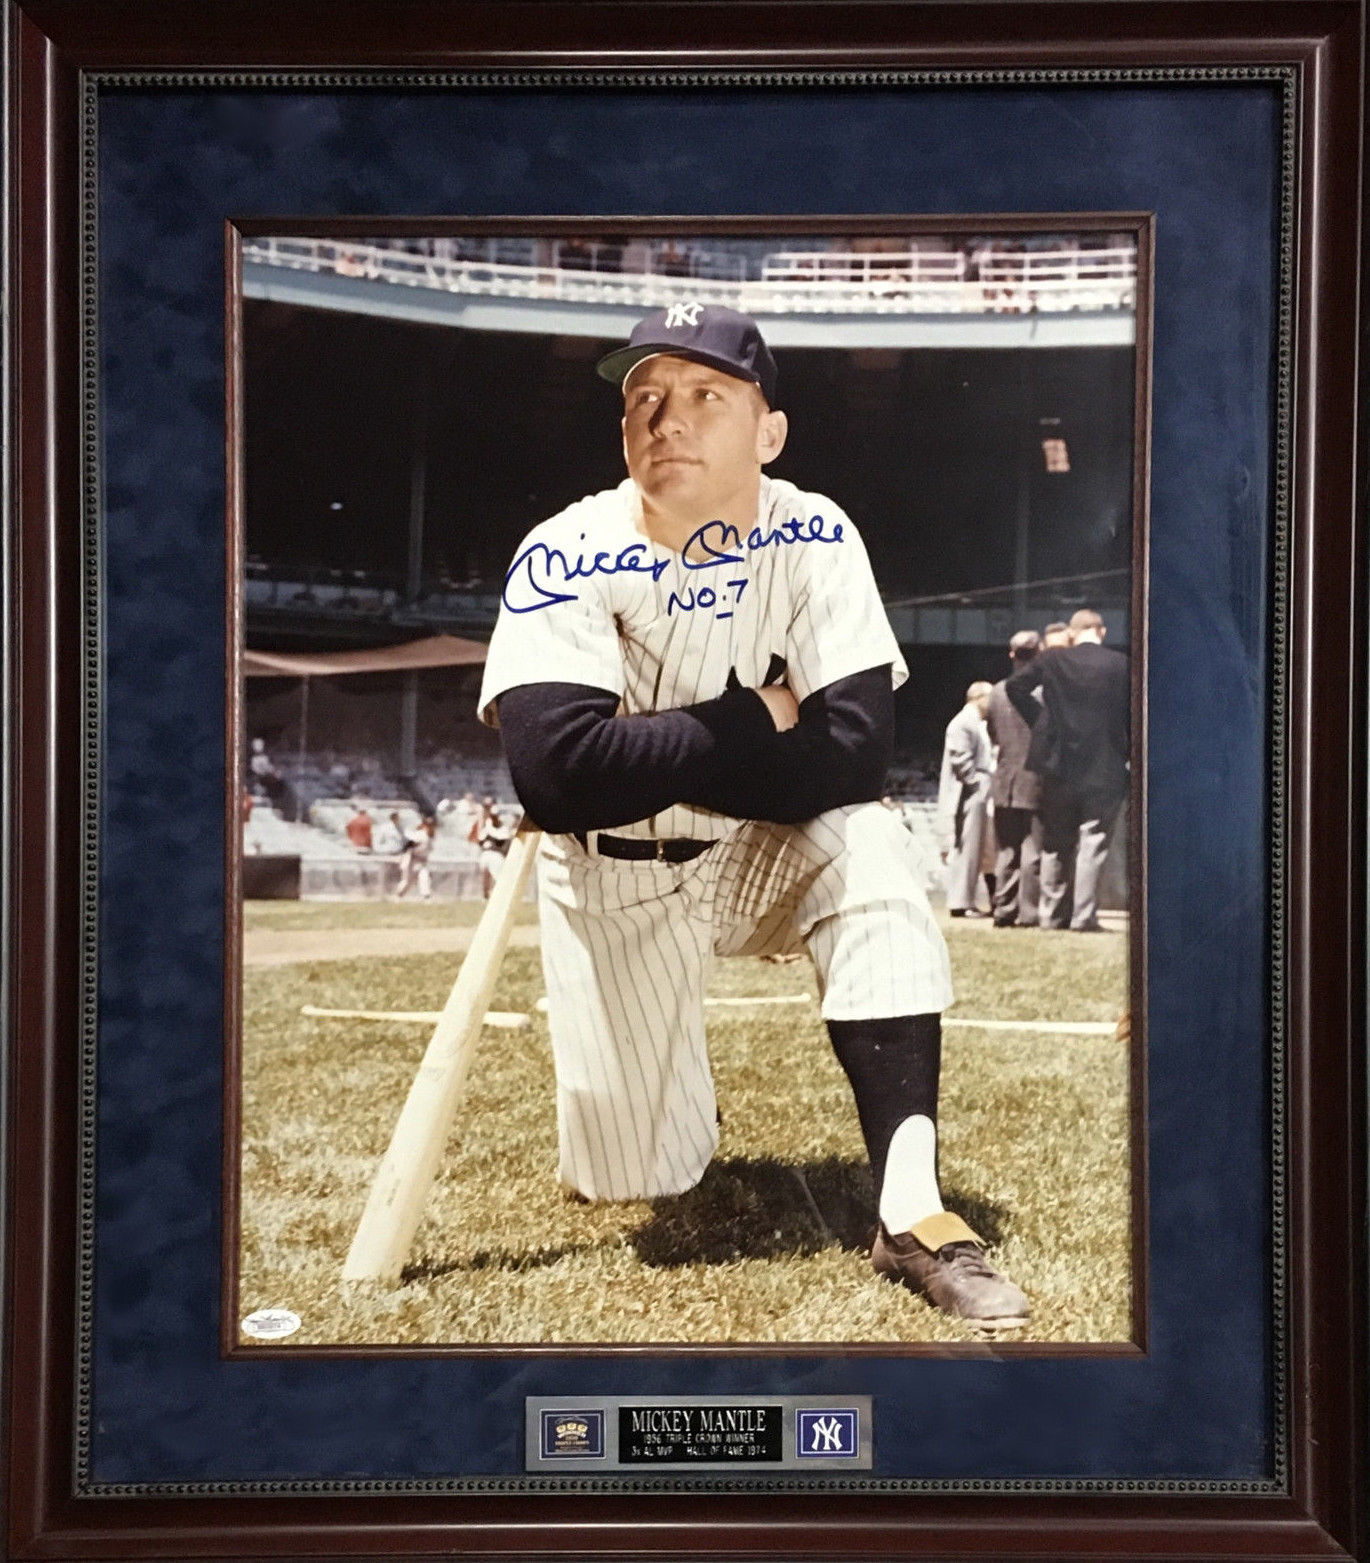 Mickey Mantle Yankees Signed 16×20 photo ins No 7 framed mint autograph JSA LOA